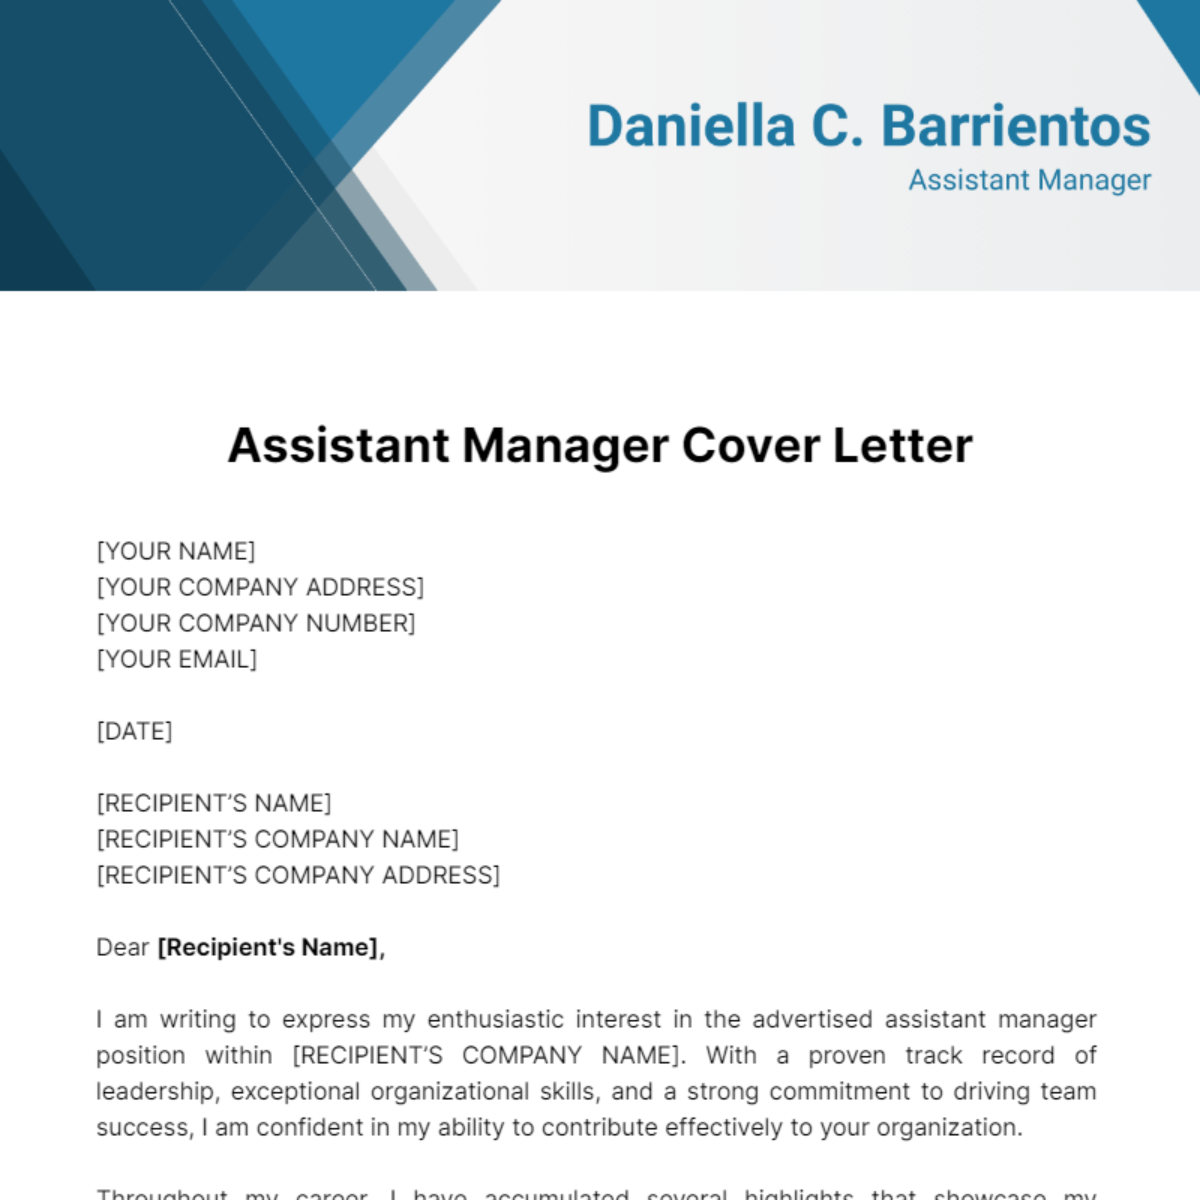 Assistant Manager Cover Letter Template